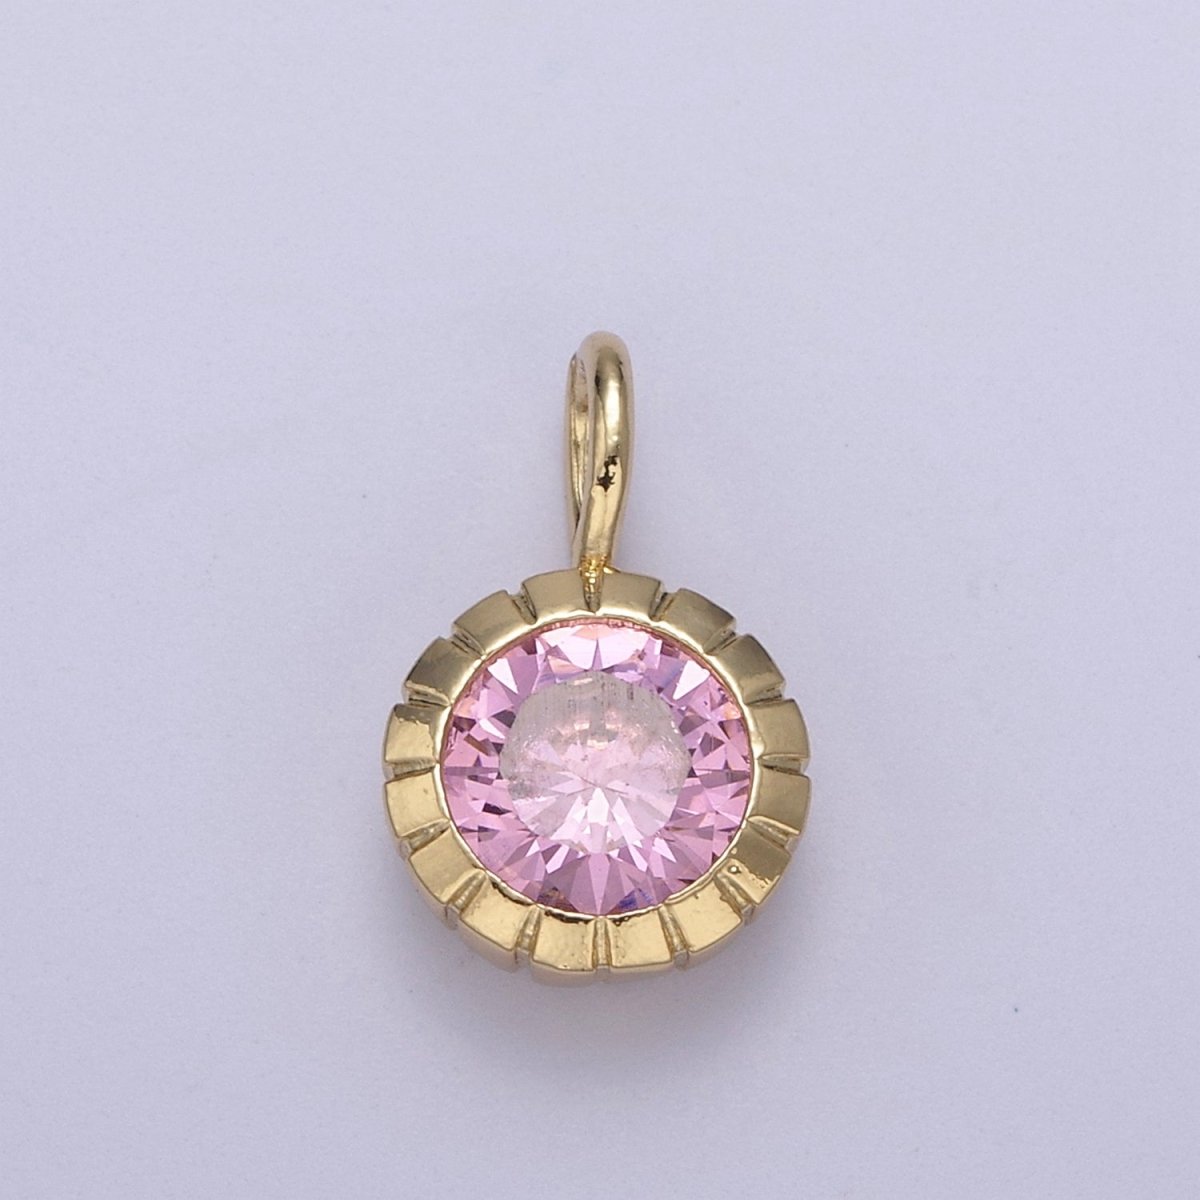 Mini Round CZ May / June Birthstone Pendant Add on Charm Dainty Pink Green Cz Stone for Necklace Bracelet Supply H-493 H-494 - DLUXCA